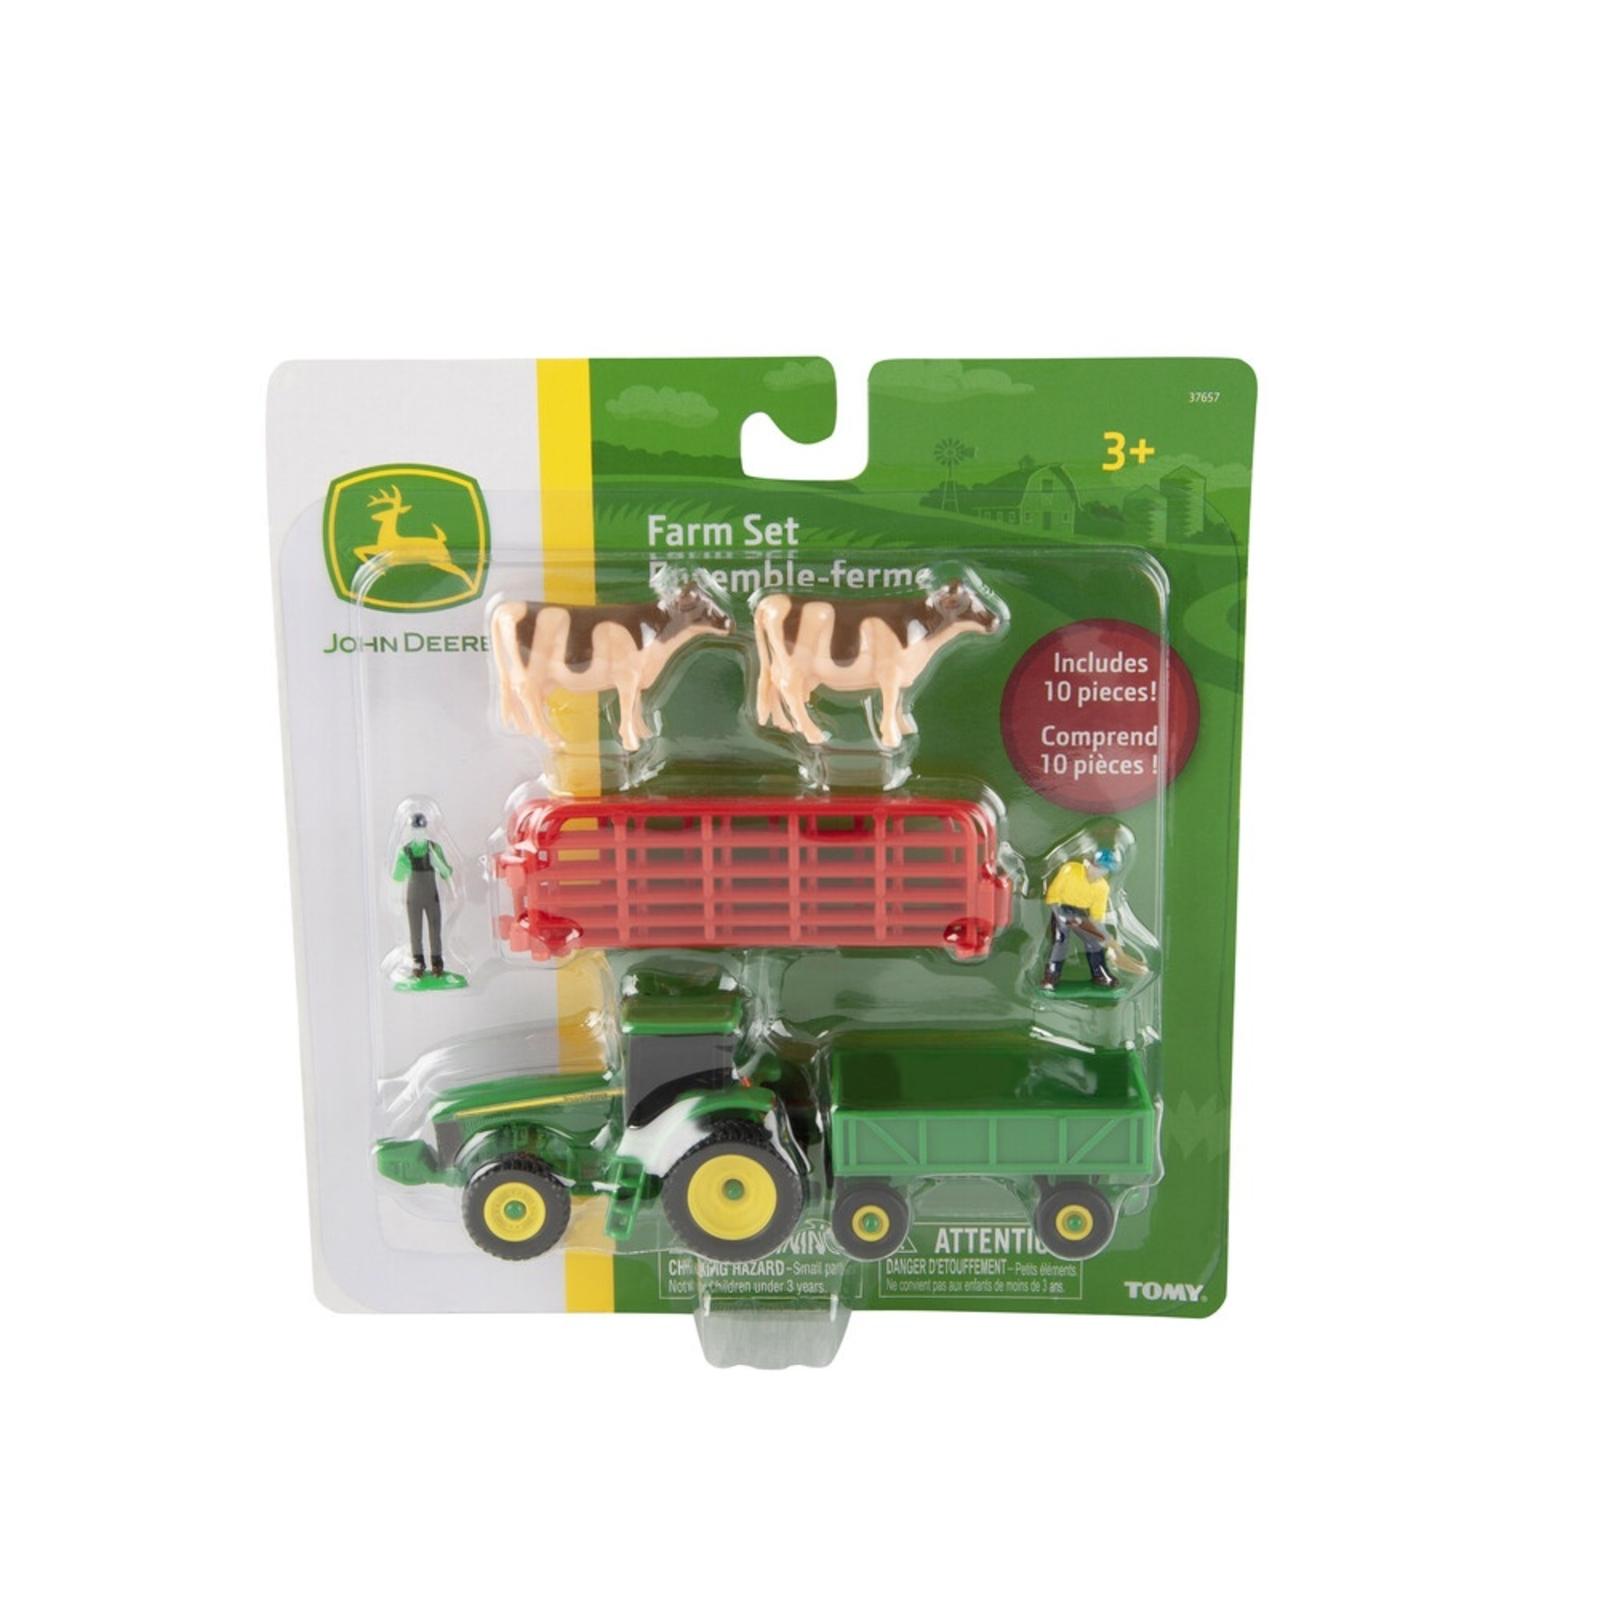 John Deere 10 Piece Farm Toy Set with Toy Tractor, Toy Animals, Farm Figures and Fencing